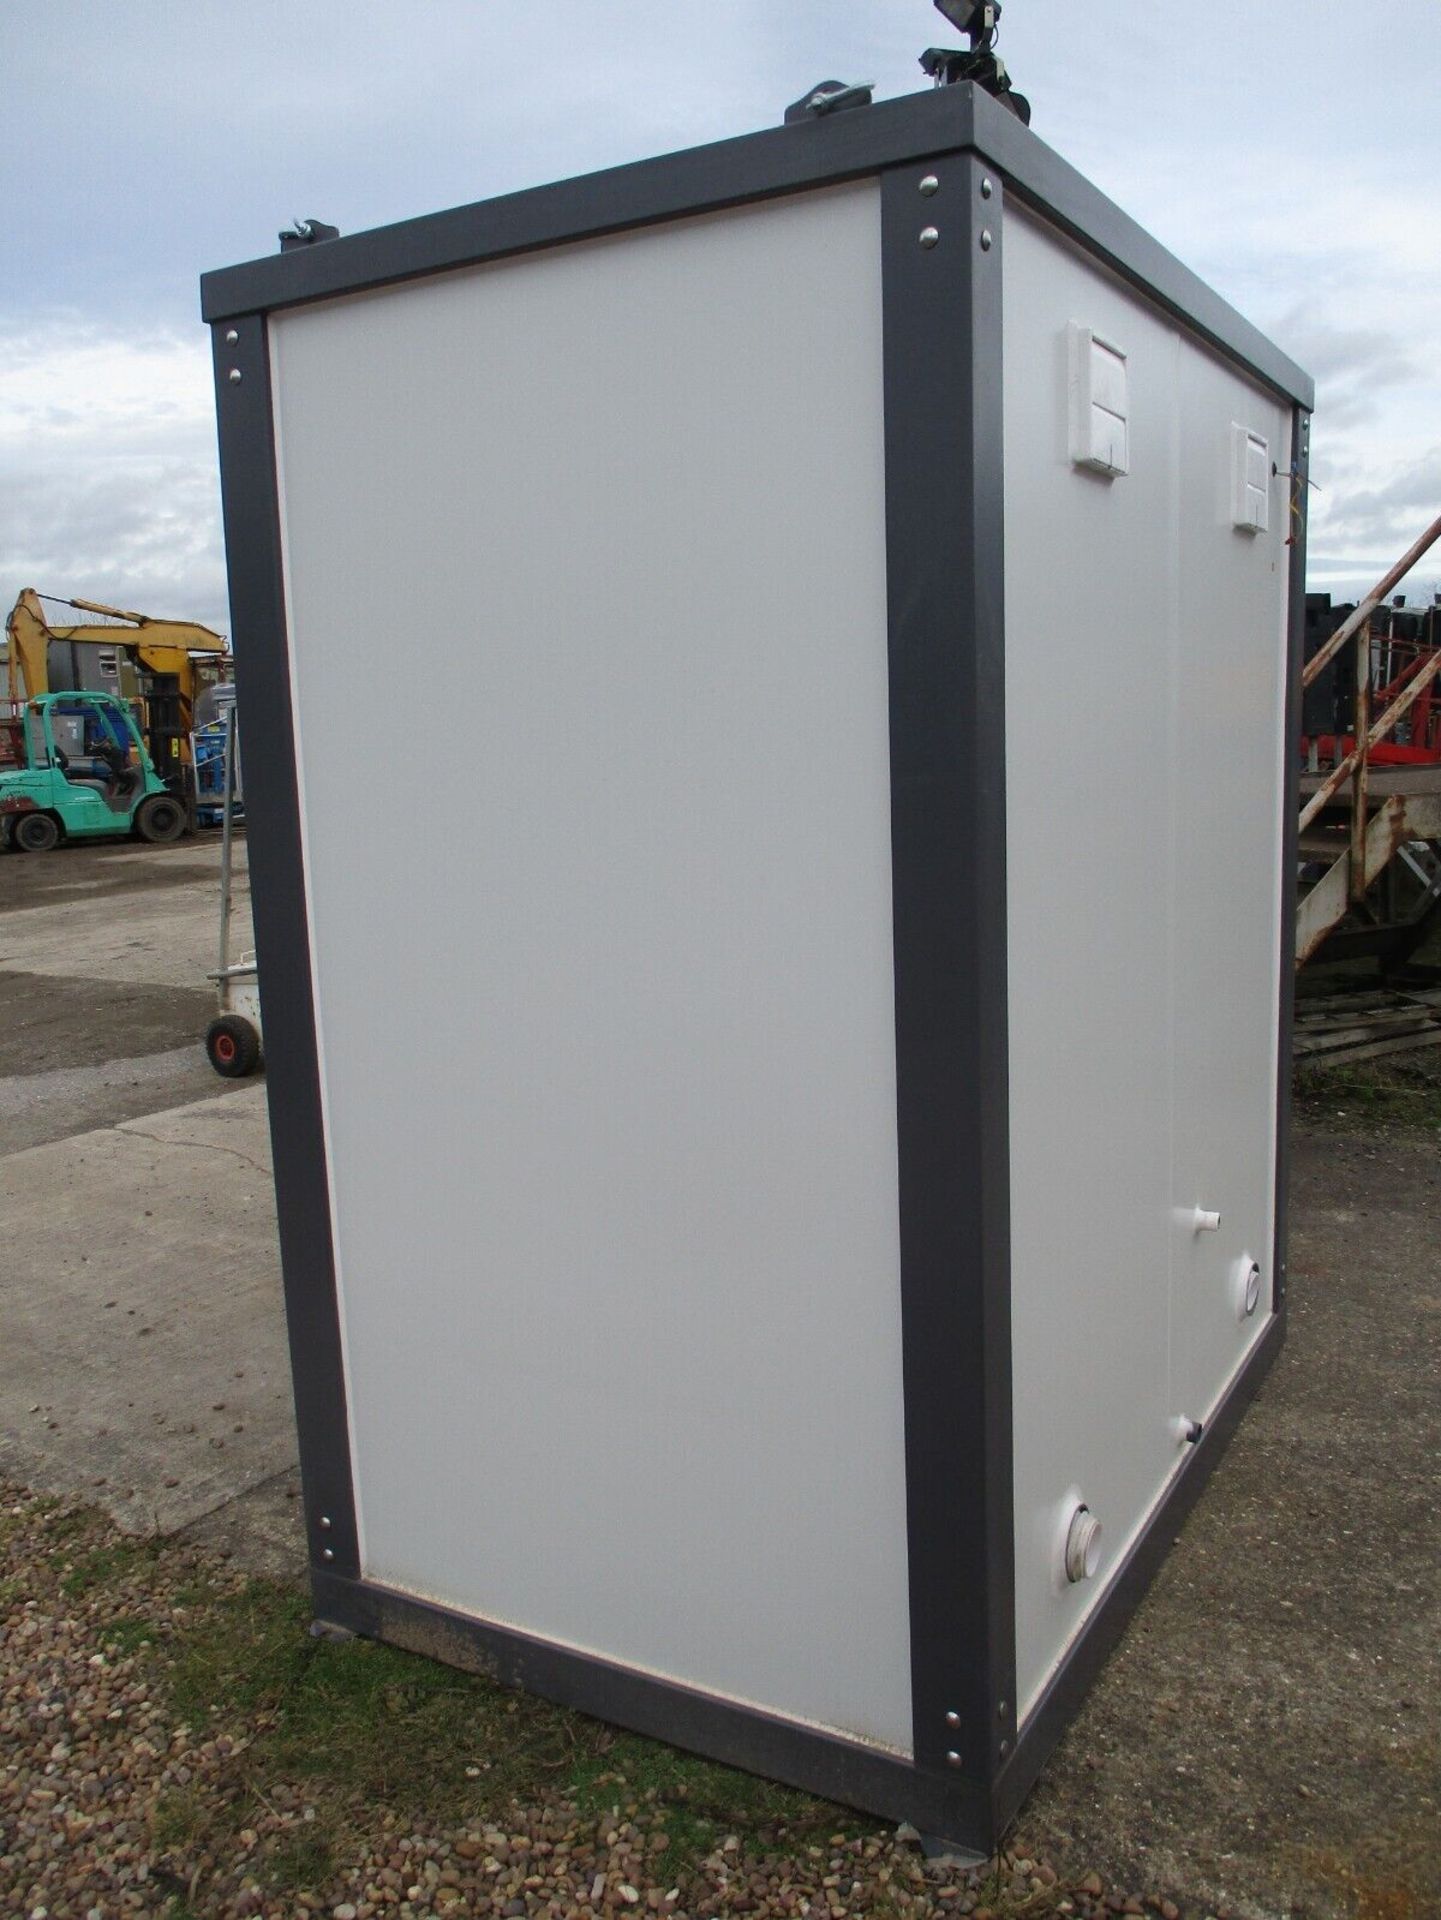 COMPACT COMFORT: 2.15M X 1.3M SHIPPING CONTAINER TOILET OASIS - Image 5 of 9